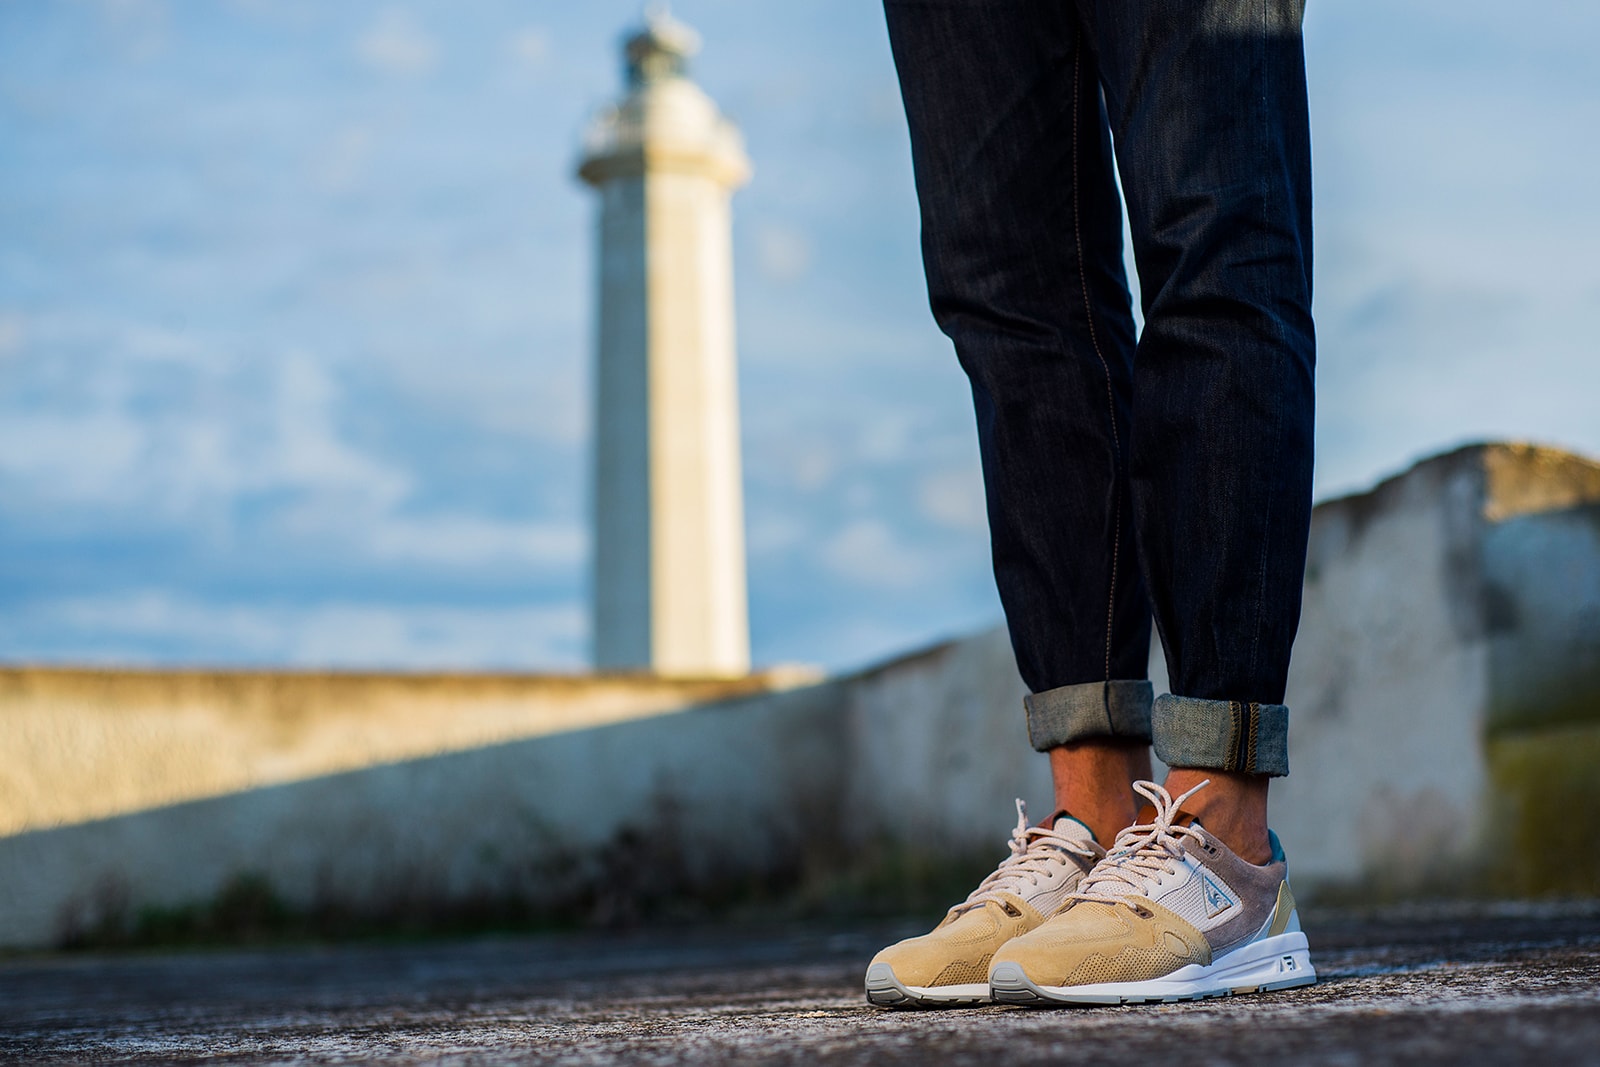 Sneakers76 x Le Coq Sportif LCS R1000 "Guardian of the Sea"